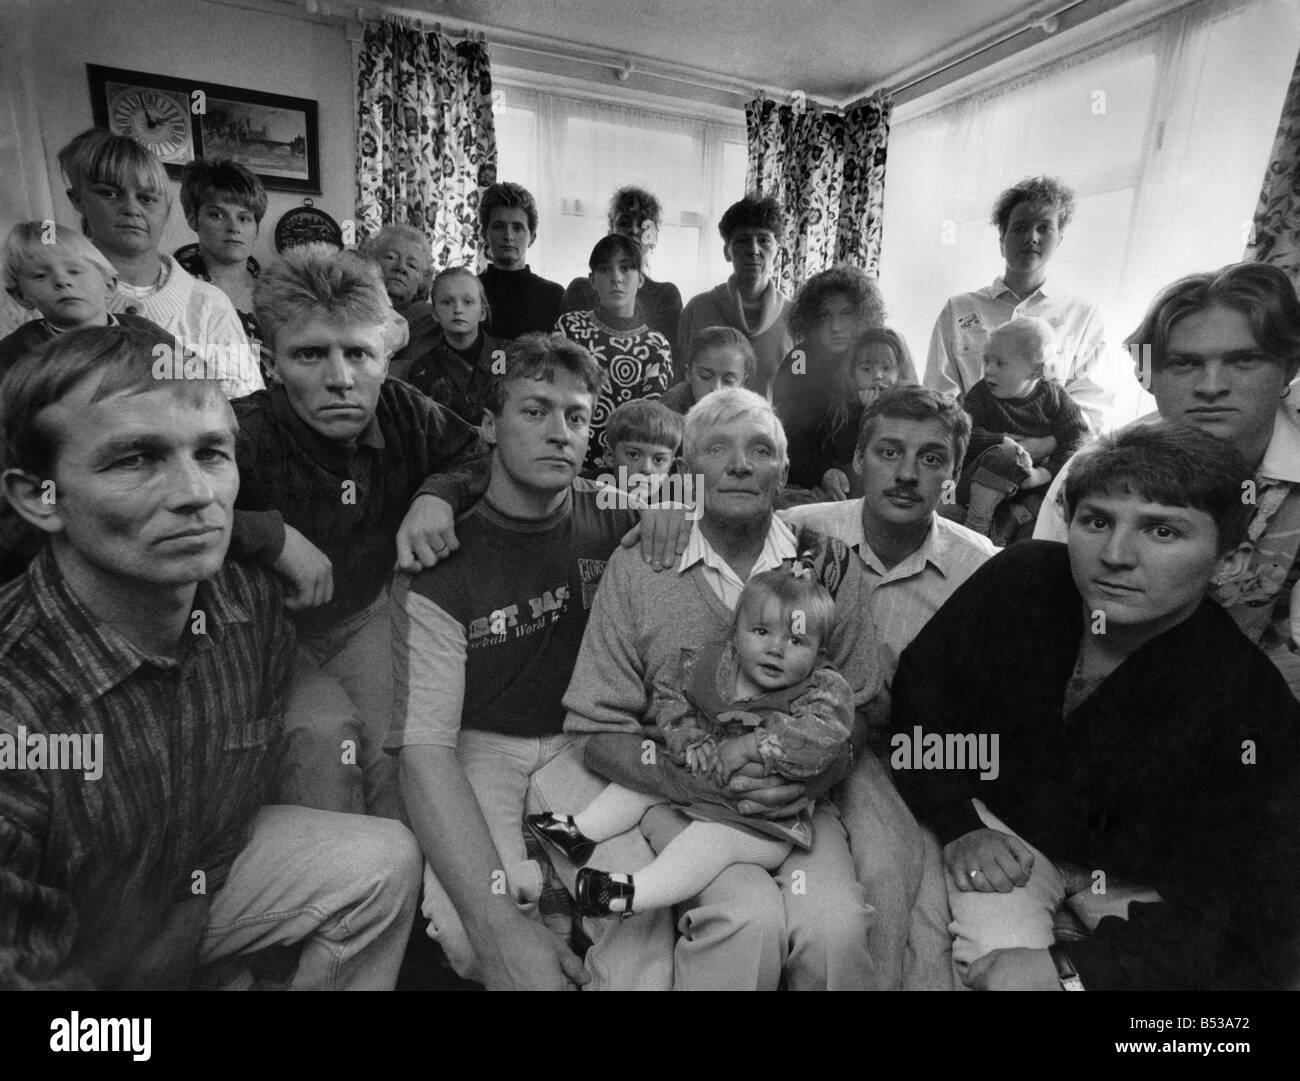 Coal miners. The Hill miners family. Left to right front row, David Kimber (son in law), Graham Hill Son, Michael Hill (son), Thurlow Hill (father), Davis Hill (Son), Mark Hill (son), John Hoole (nephew) and youngest grand daughter Amy (9 months) on grandfather's knee. October 1992 P017672 Stock Photo